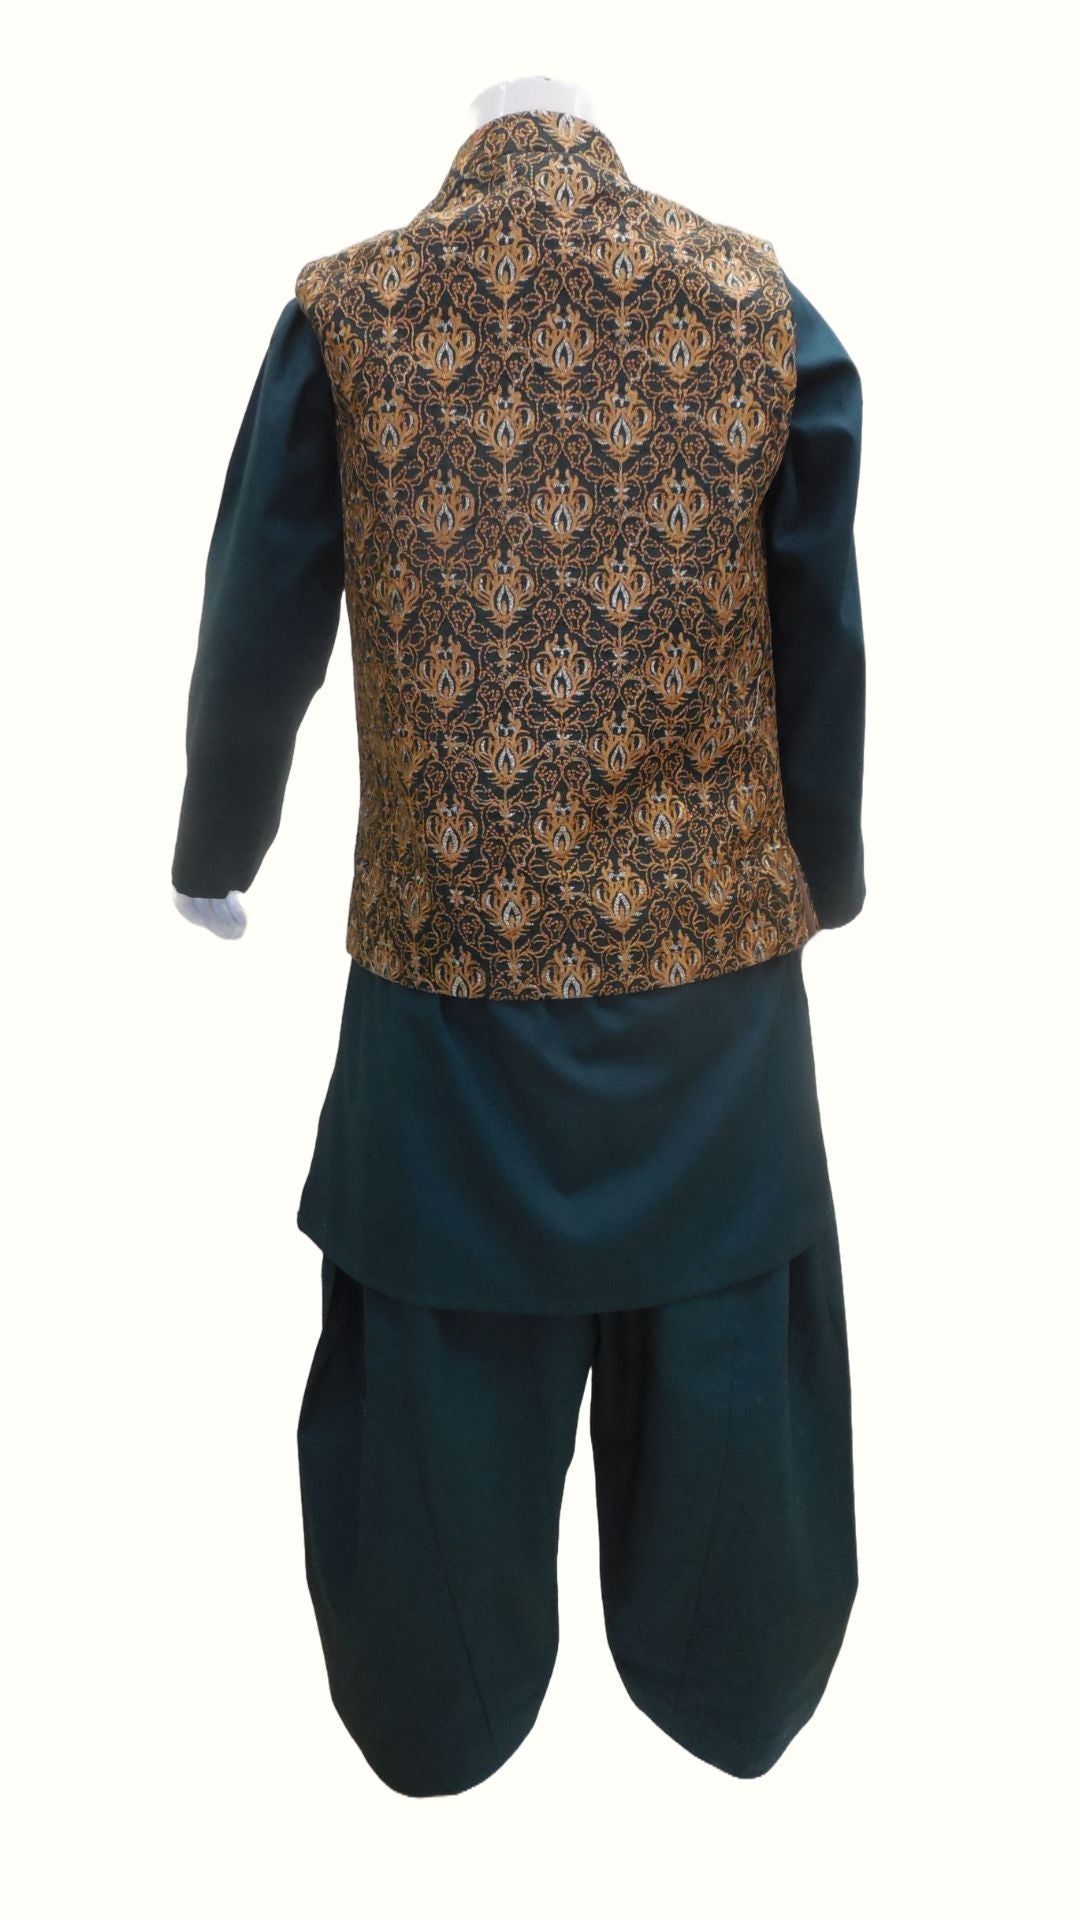 Embroidered waistcoat suit